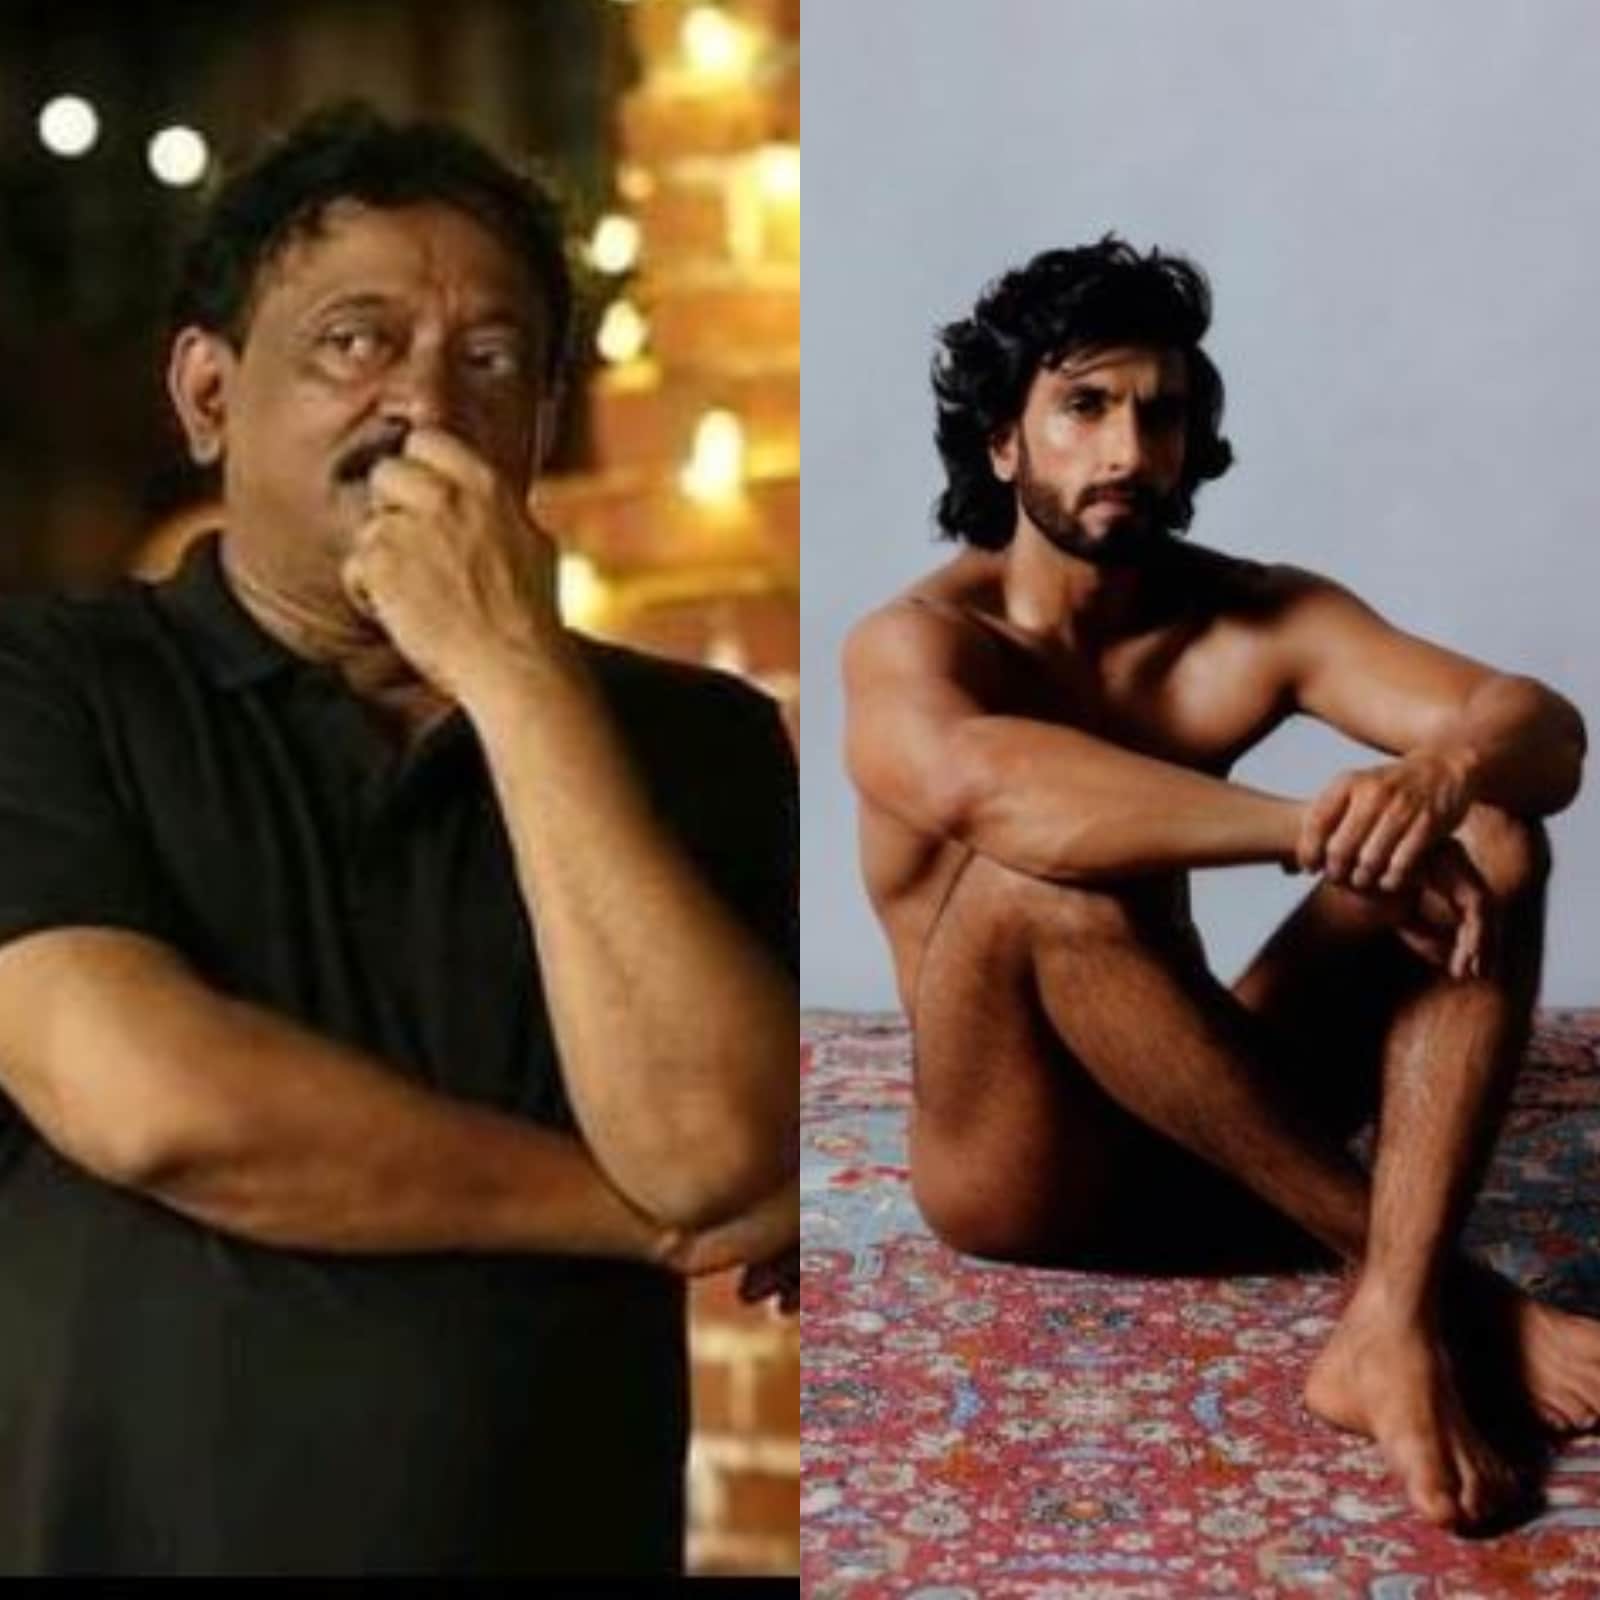 Sexy Video Vijay - Ram Gopal Varma on Ranveer Singh's Nude Photoshoot: 'If Women Can Show Off  Their Sexy Bodies Why Can't Men?' - News18